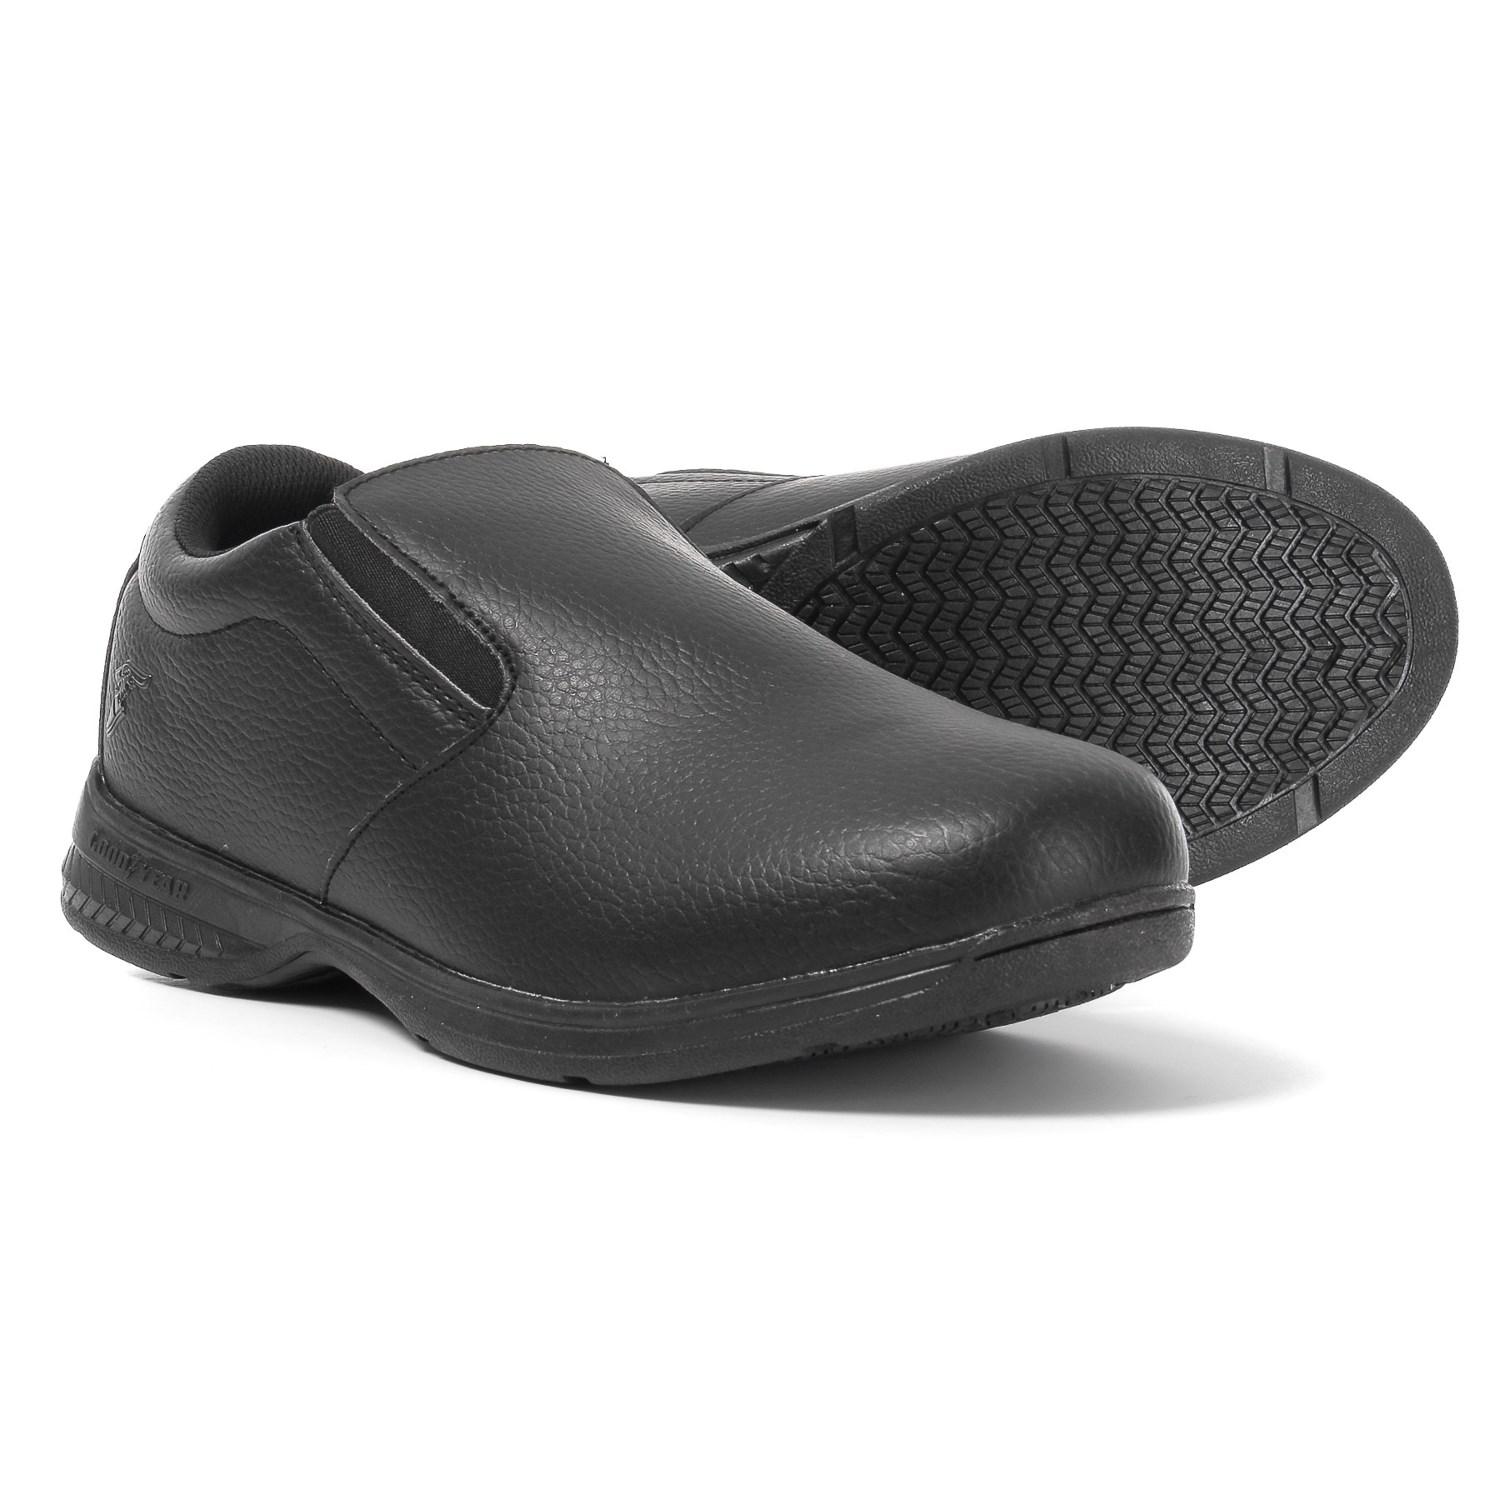 Goodyear Carson Non-slip Work Shoes in 